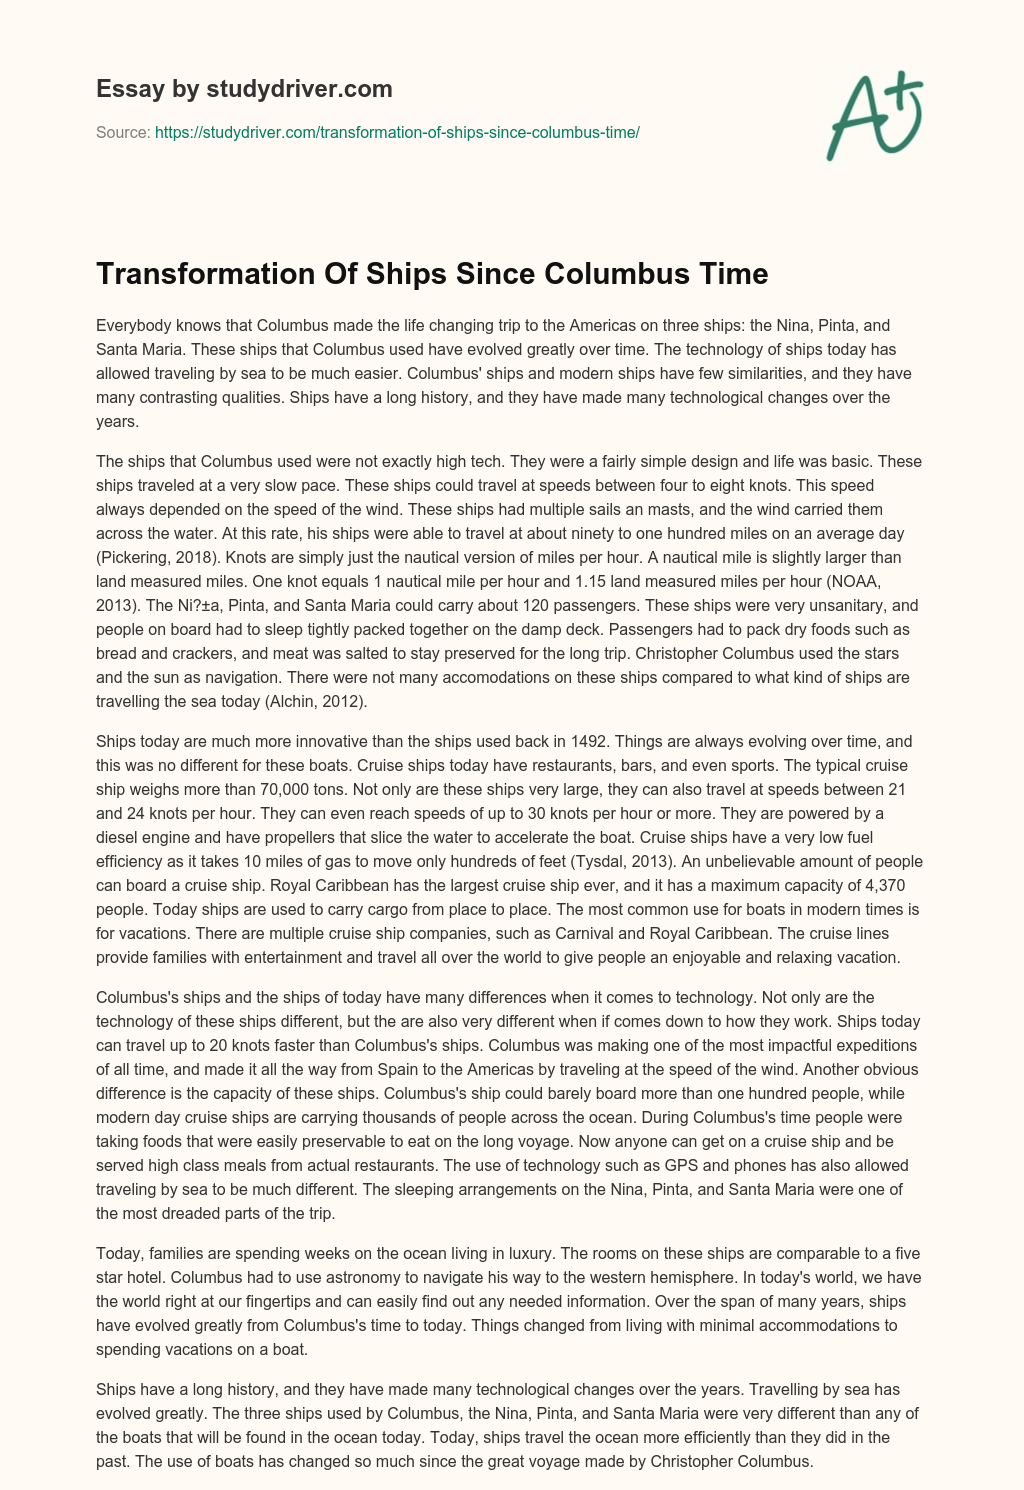 Transformation of Ships Since Columbus Time essay